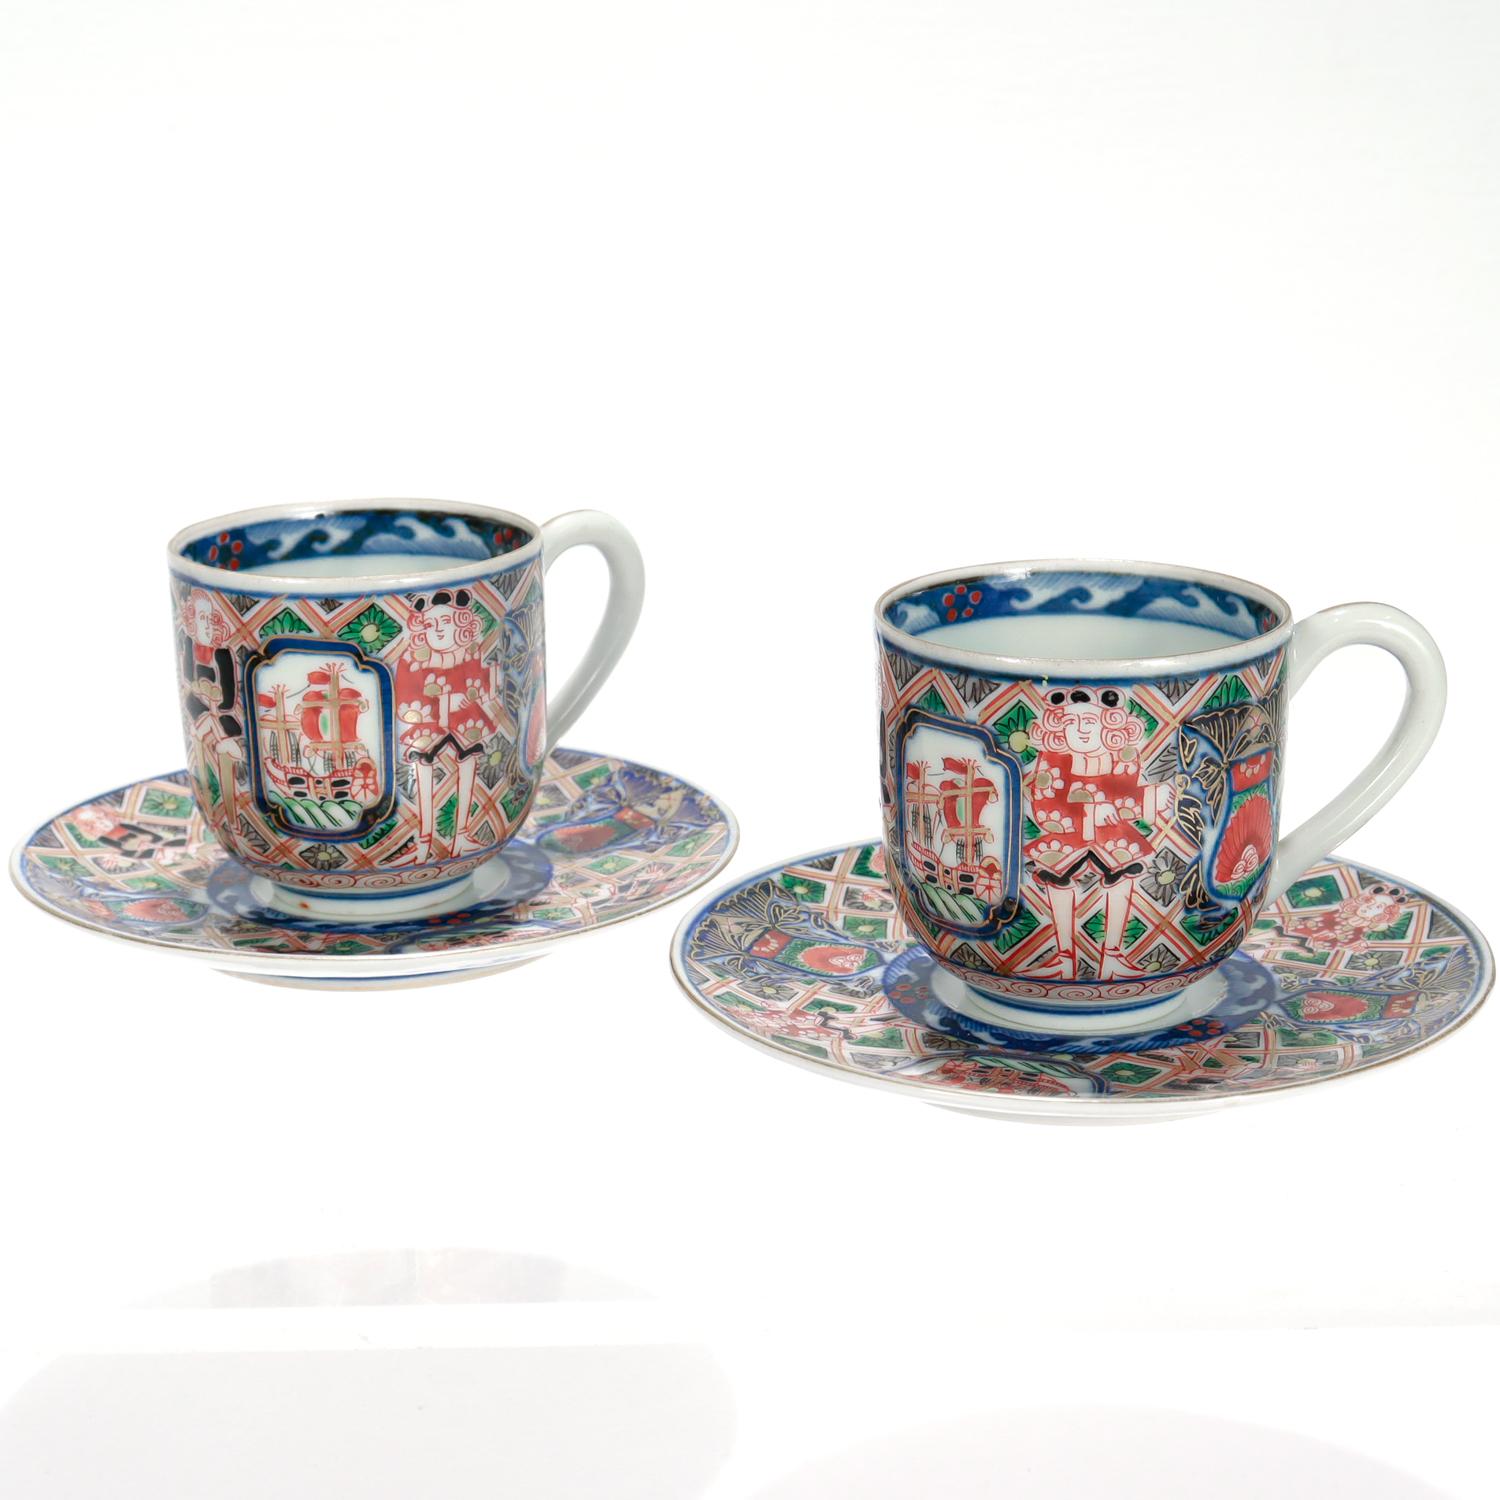 Pair of Antique Japanese Meiji 'Black Ship' Imari Porcelain Cups & Saucers In Good Condition For Sale In Philadelphia, PA